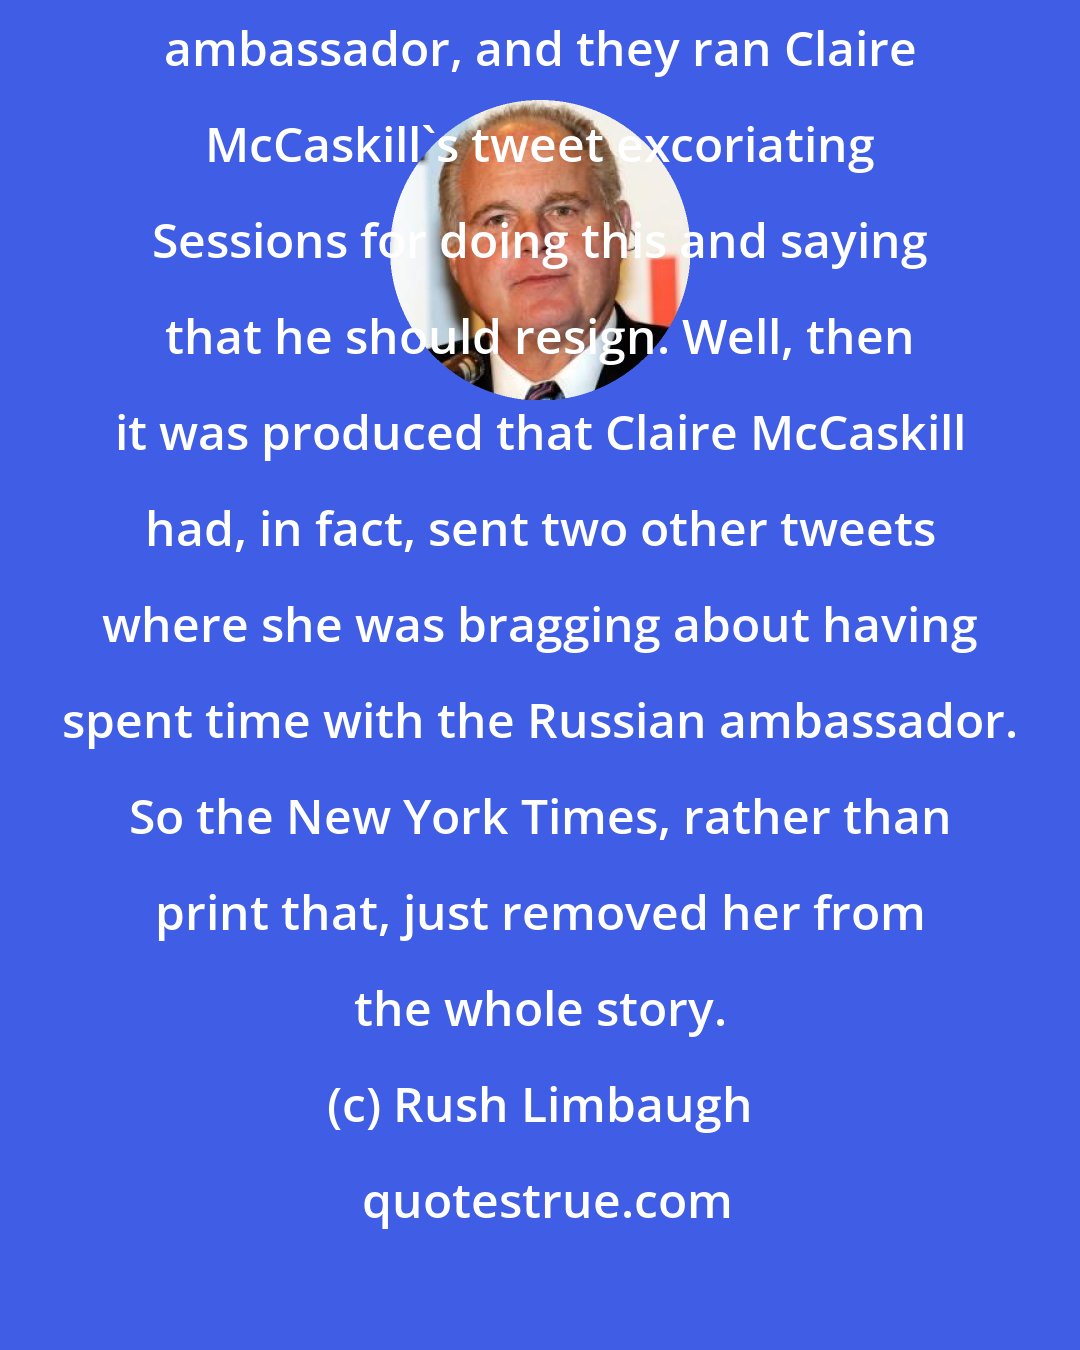 Rush Limbaugh: The New York Times ran a story about [Jeff] Sessions meeting the Russian ambassador, and they ran Claire McCaskill's tweet excoriating Sessions for doing this and saying that he should resign. Well, then it was produced that Claire McCaskill had, in fact, sent two other tweets where she was bragging about having spent time with the Russian ambassador. So the New York Times, rather than print that, just removed her from the whole story.